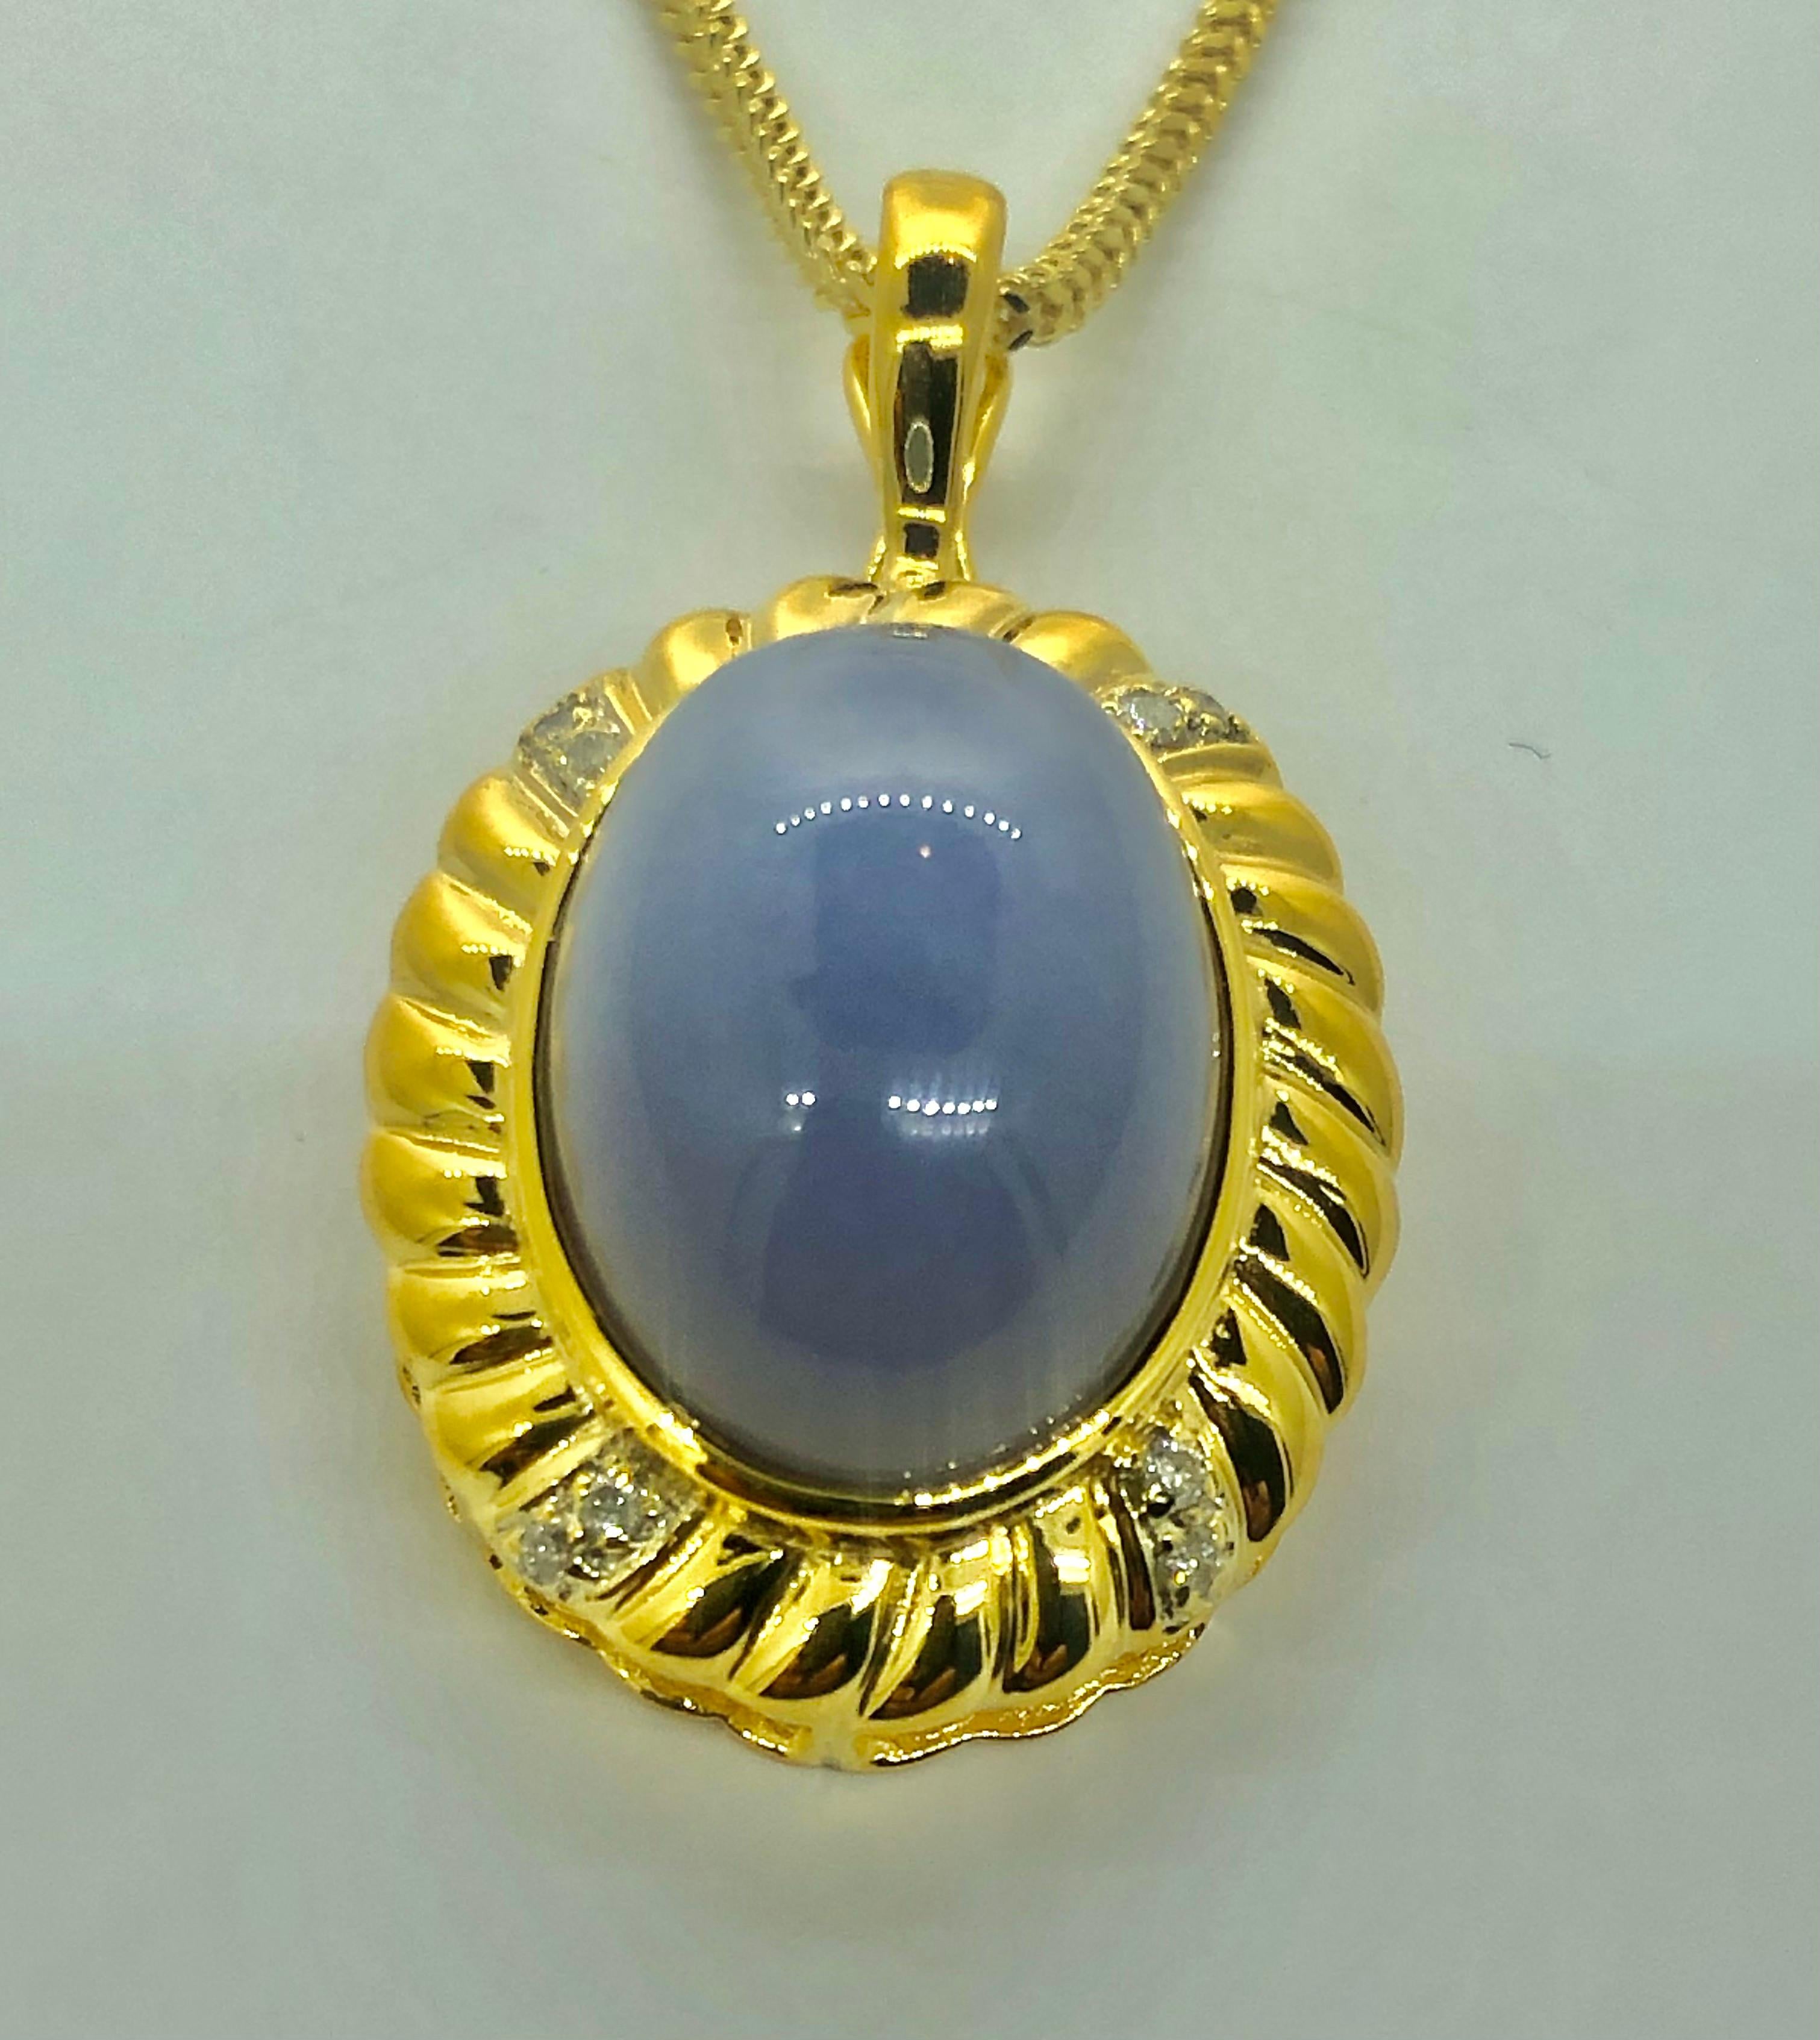 Showcasing a stunning and vibrant Lavender Jade Necklace. The pendant offers a perfectly set center Oval Shape Lavender Jade, surrounded by four rows of brilliant cut Round Diamonds suspended from a beautiful 22 inch chain, all in Yellow Gold. The